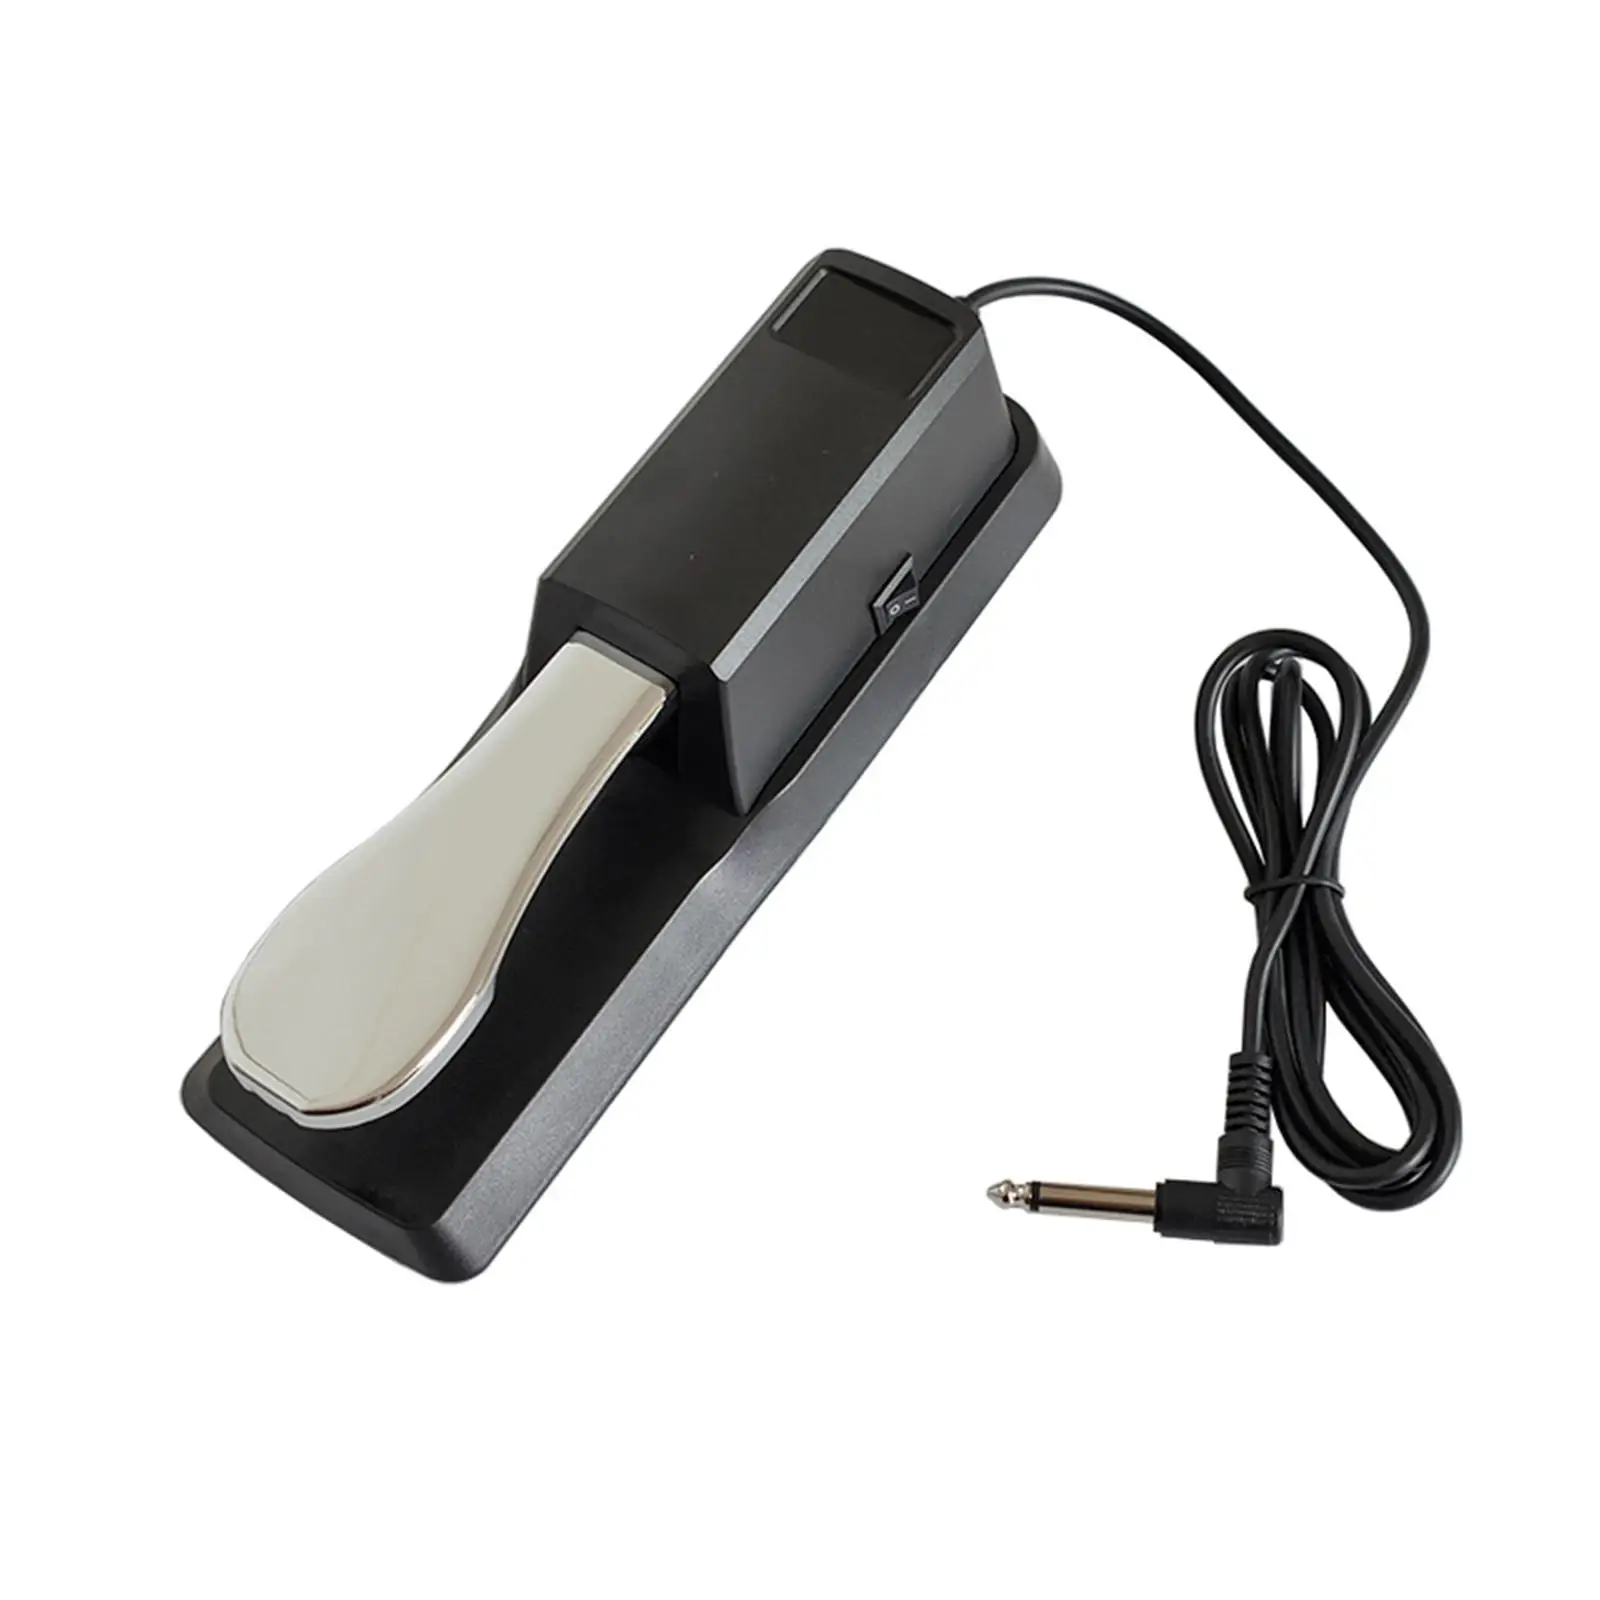 Keyboard Piano Pedal Polarity Switch Anti Slip Sustain Pedal for Training Repairing Performance Music Instrument Parts Exercise